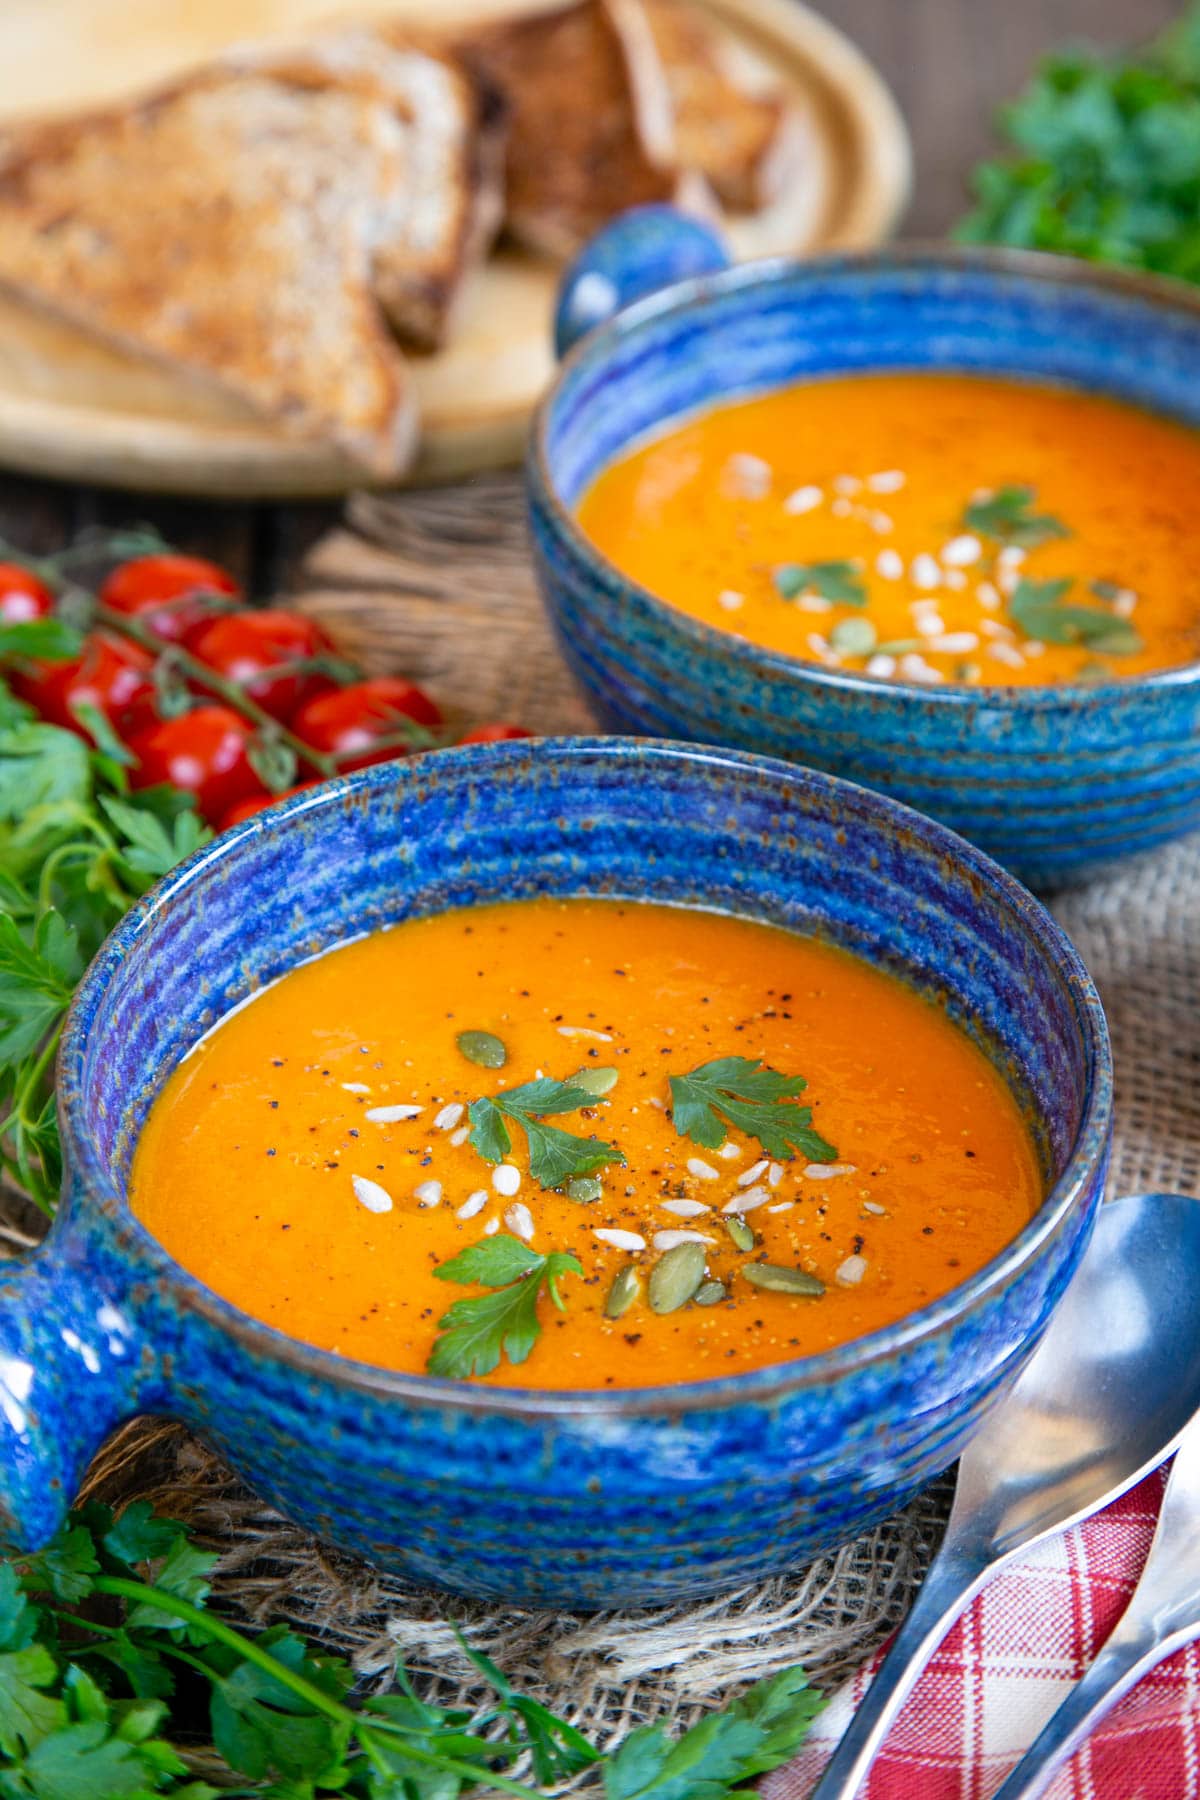 Garnish your tomato soup and serve with delicious homemade bread for the best, most satisfying lunch.